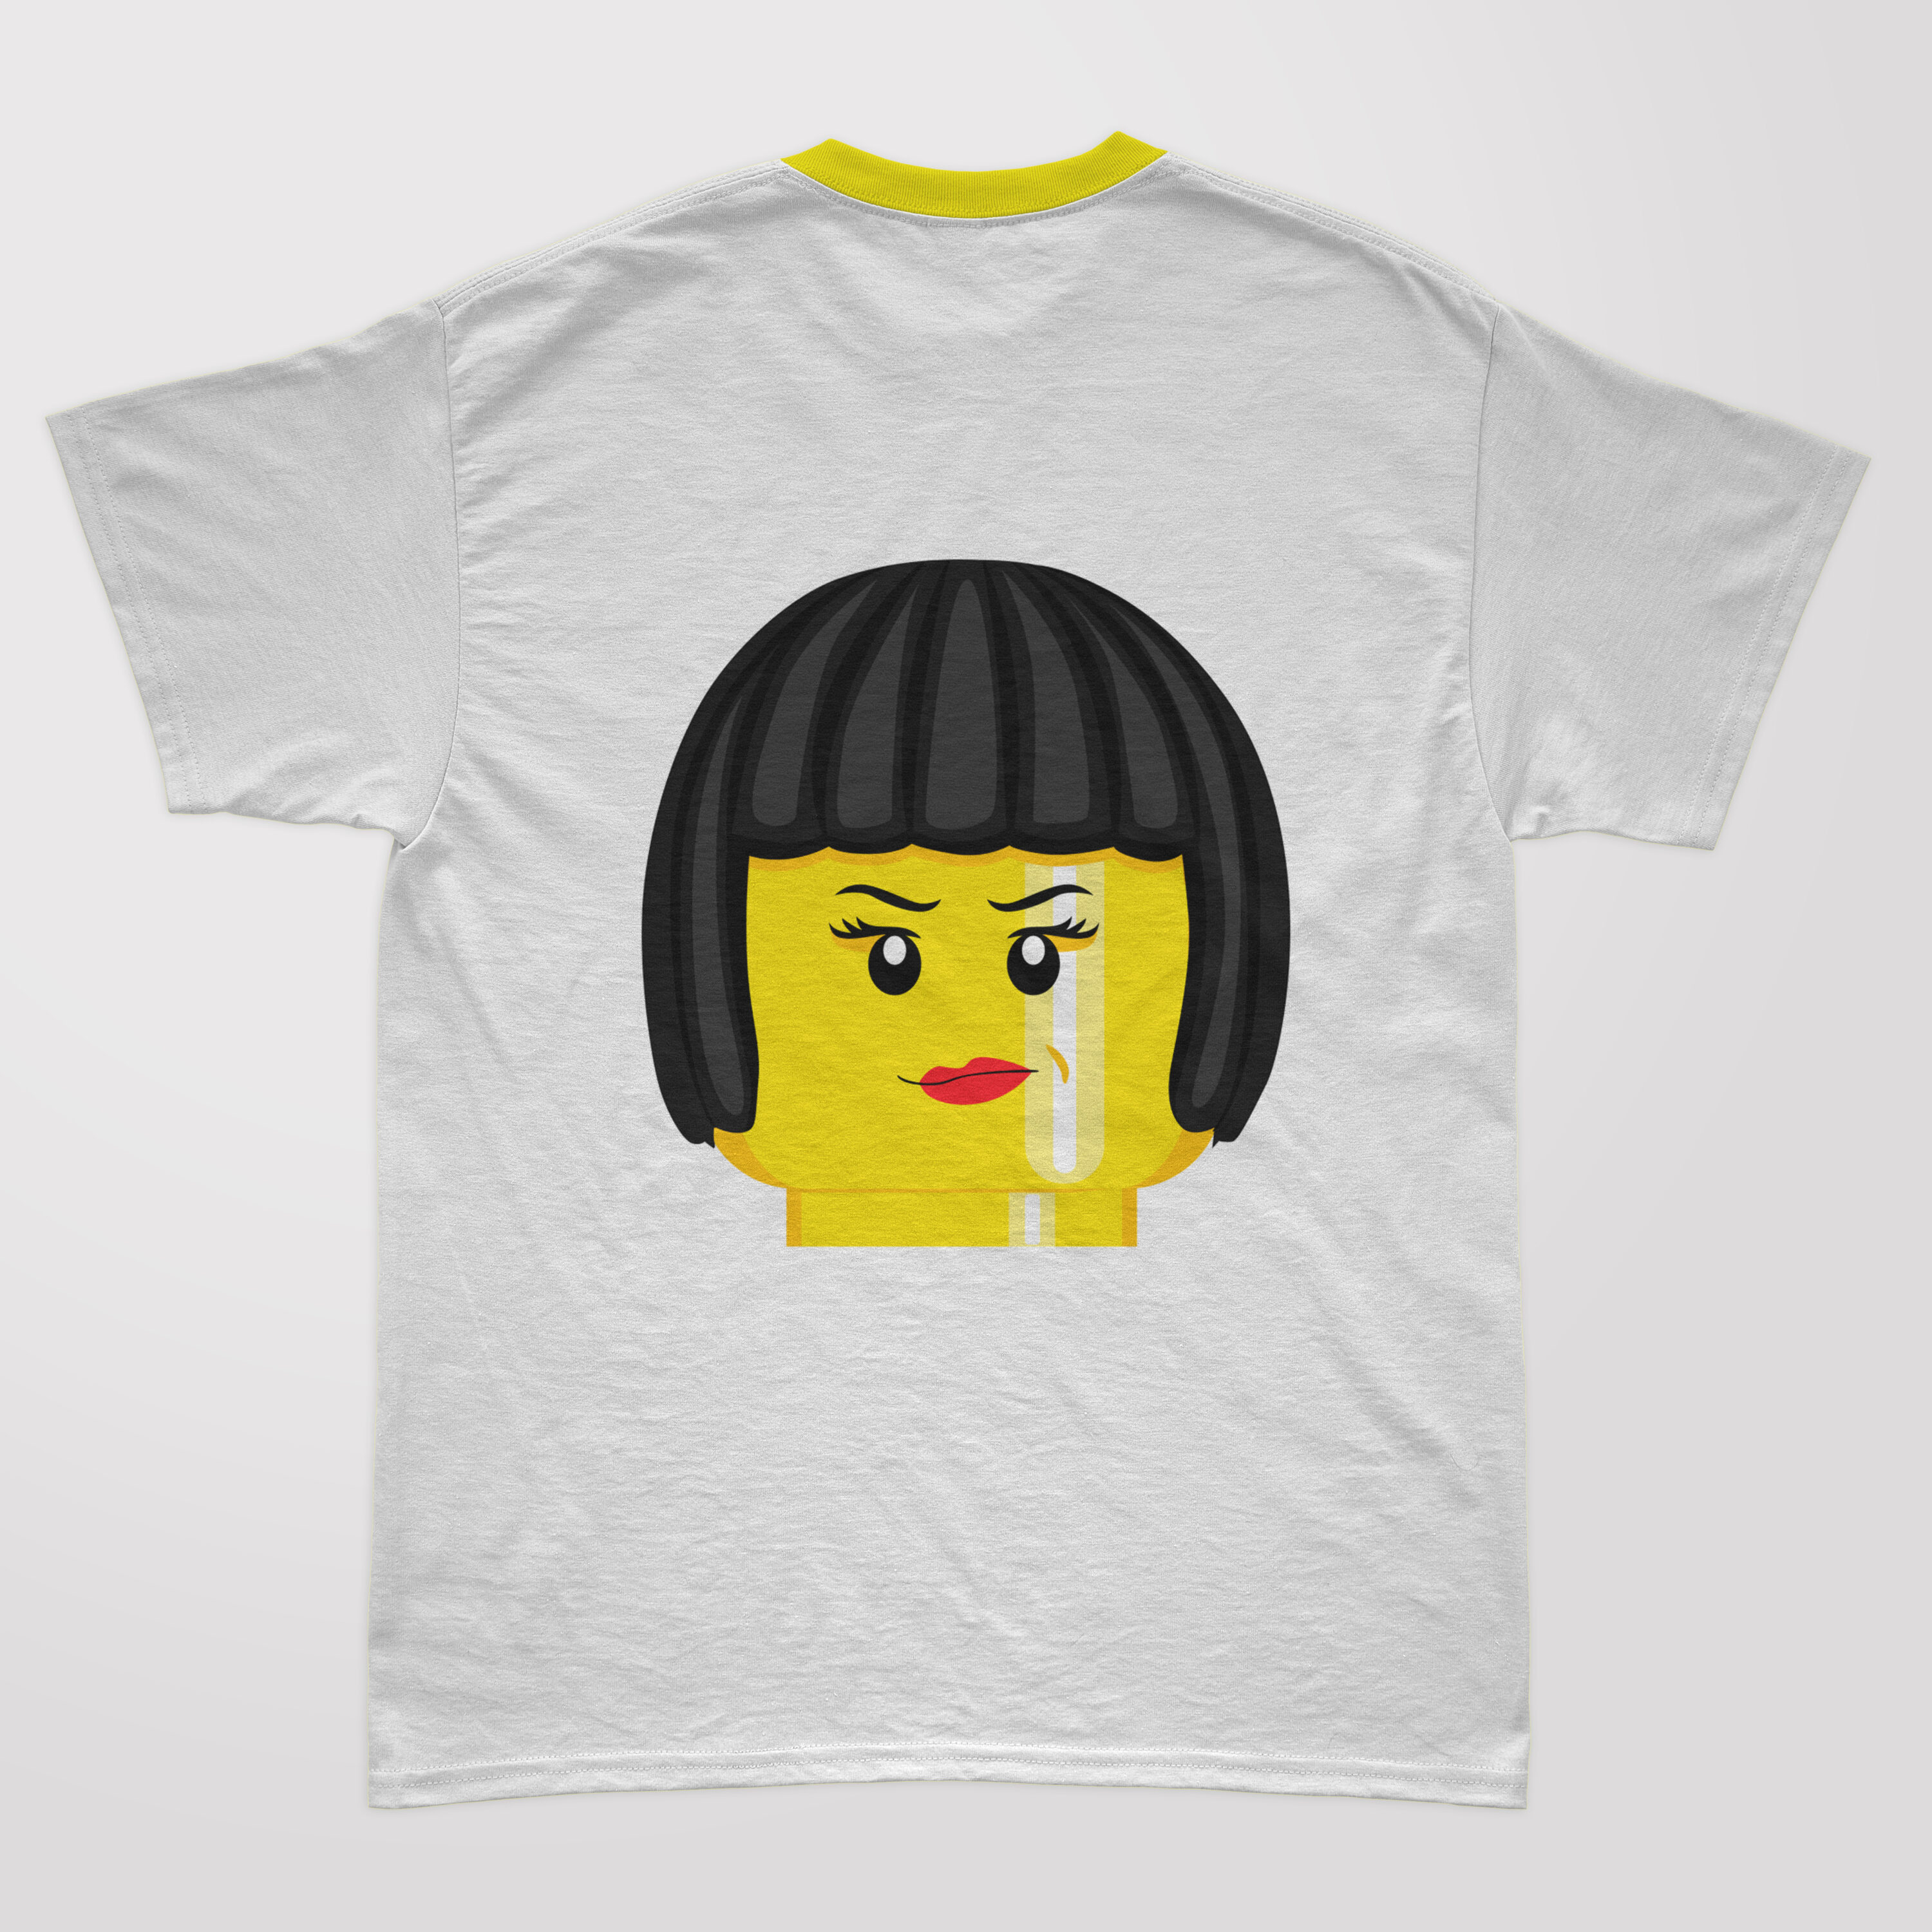 Lego girl with square black hair.